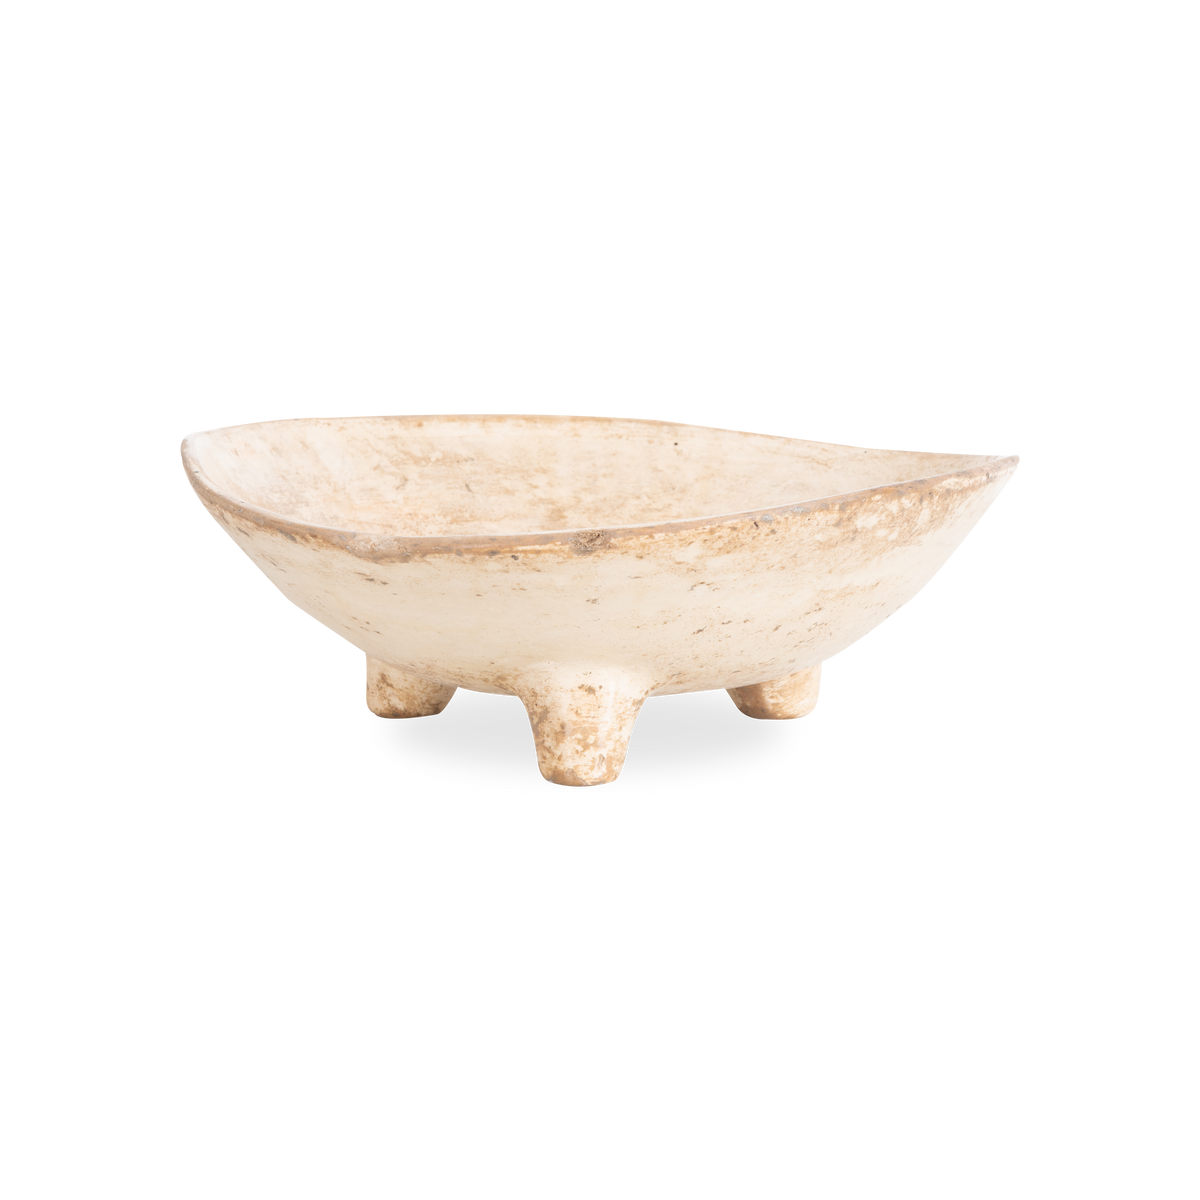 Adding an organic quality to your countertop collection, the Paper Mache Footed Bowl is defined by its rustic, visual textures and its unique exterior glaze.